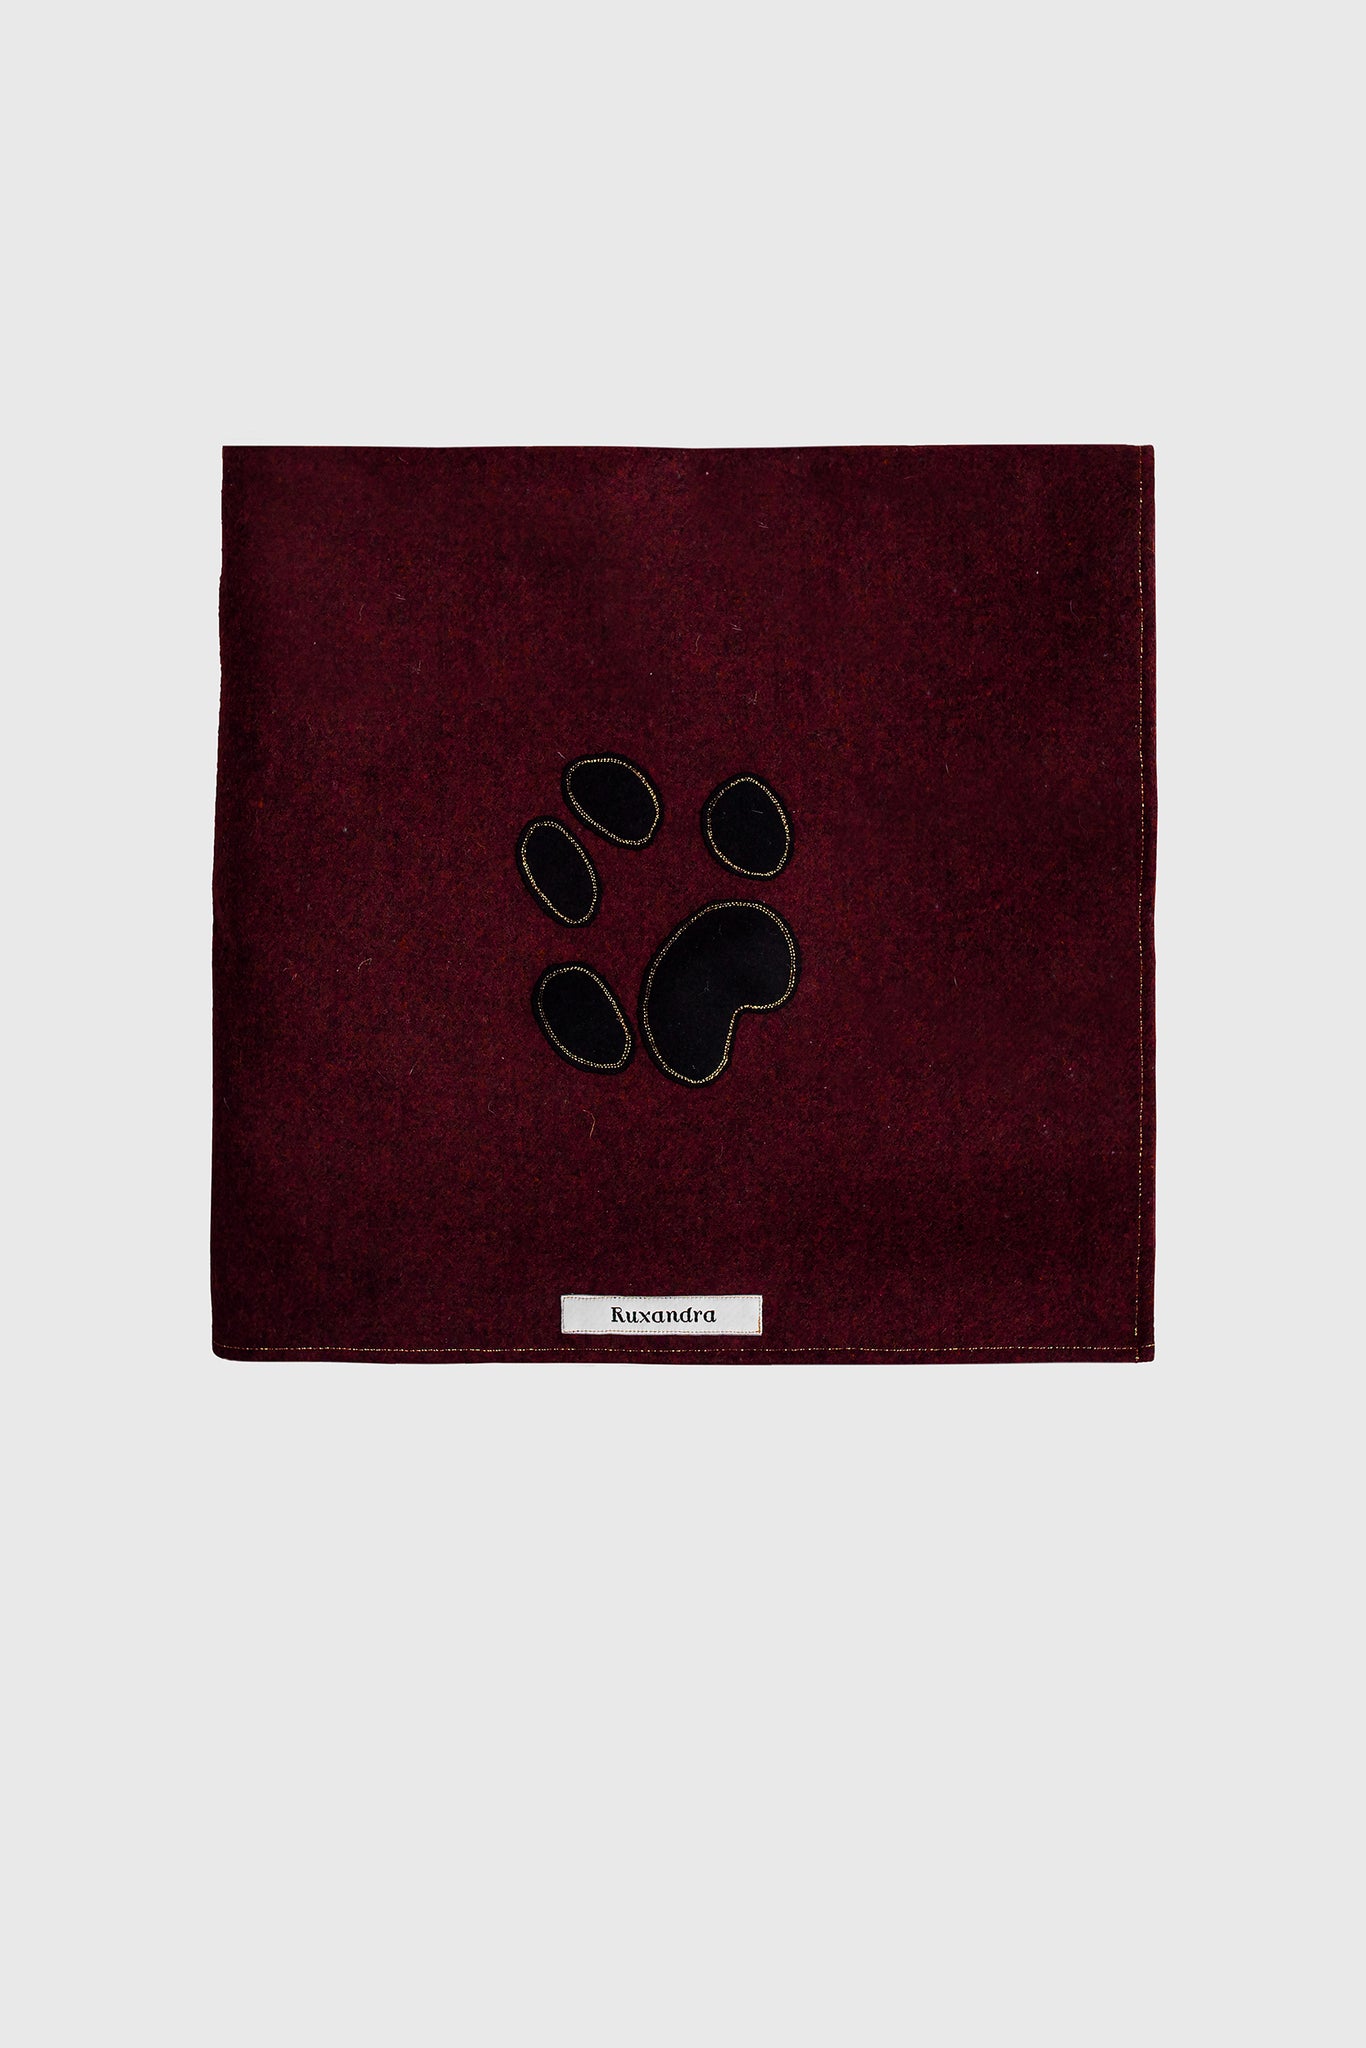 dogs and cats accessories, perfect for keeping your pet warm, for all sizes of dogs, small medium and large breeds, soft and fashionable blanket, use it in your car or bag to carry your dog and keep it warm, Ruxandra designed pet covering, bedcover for dogs